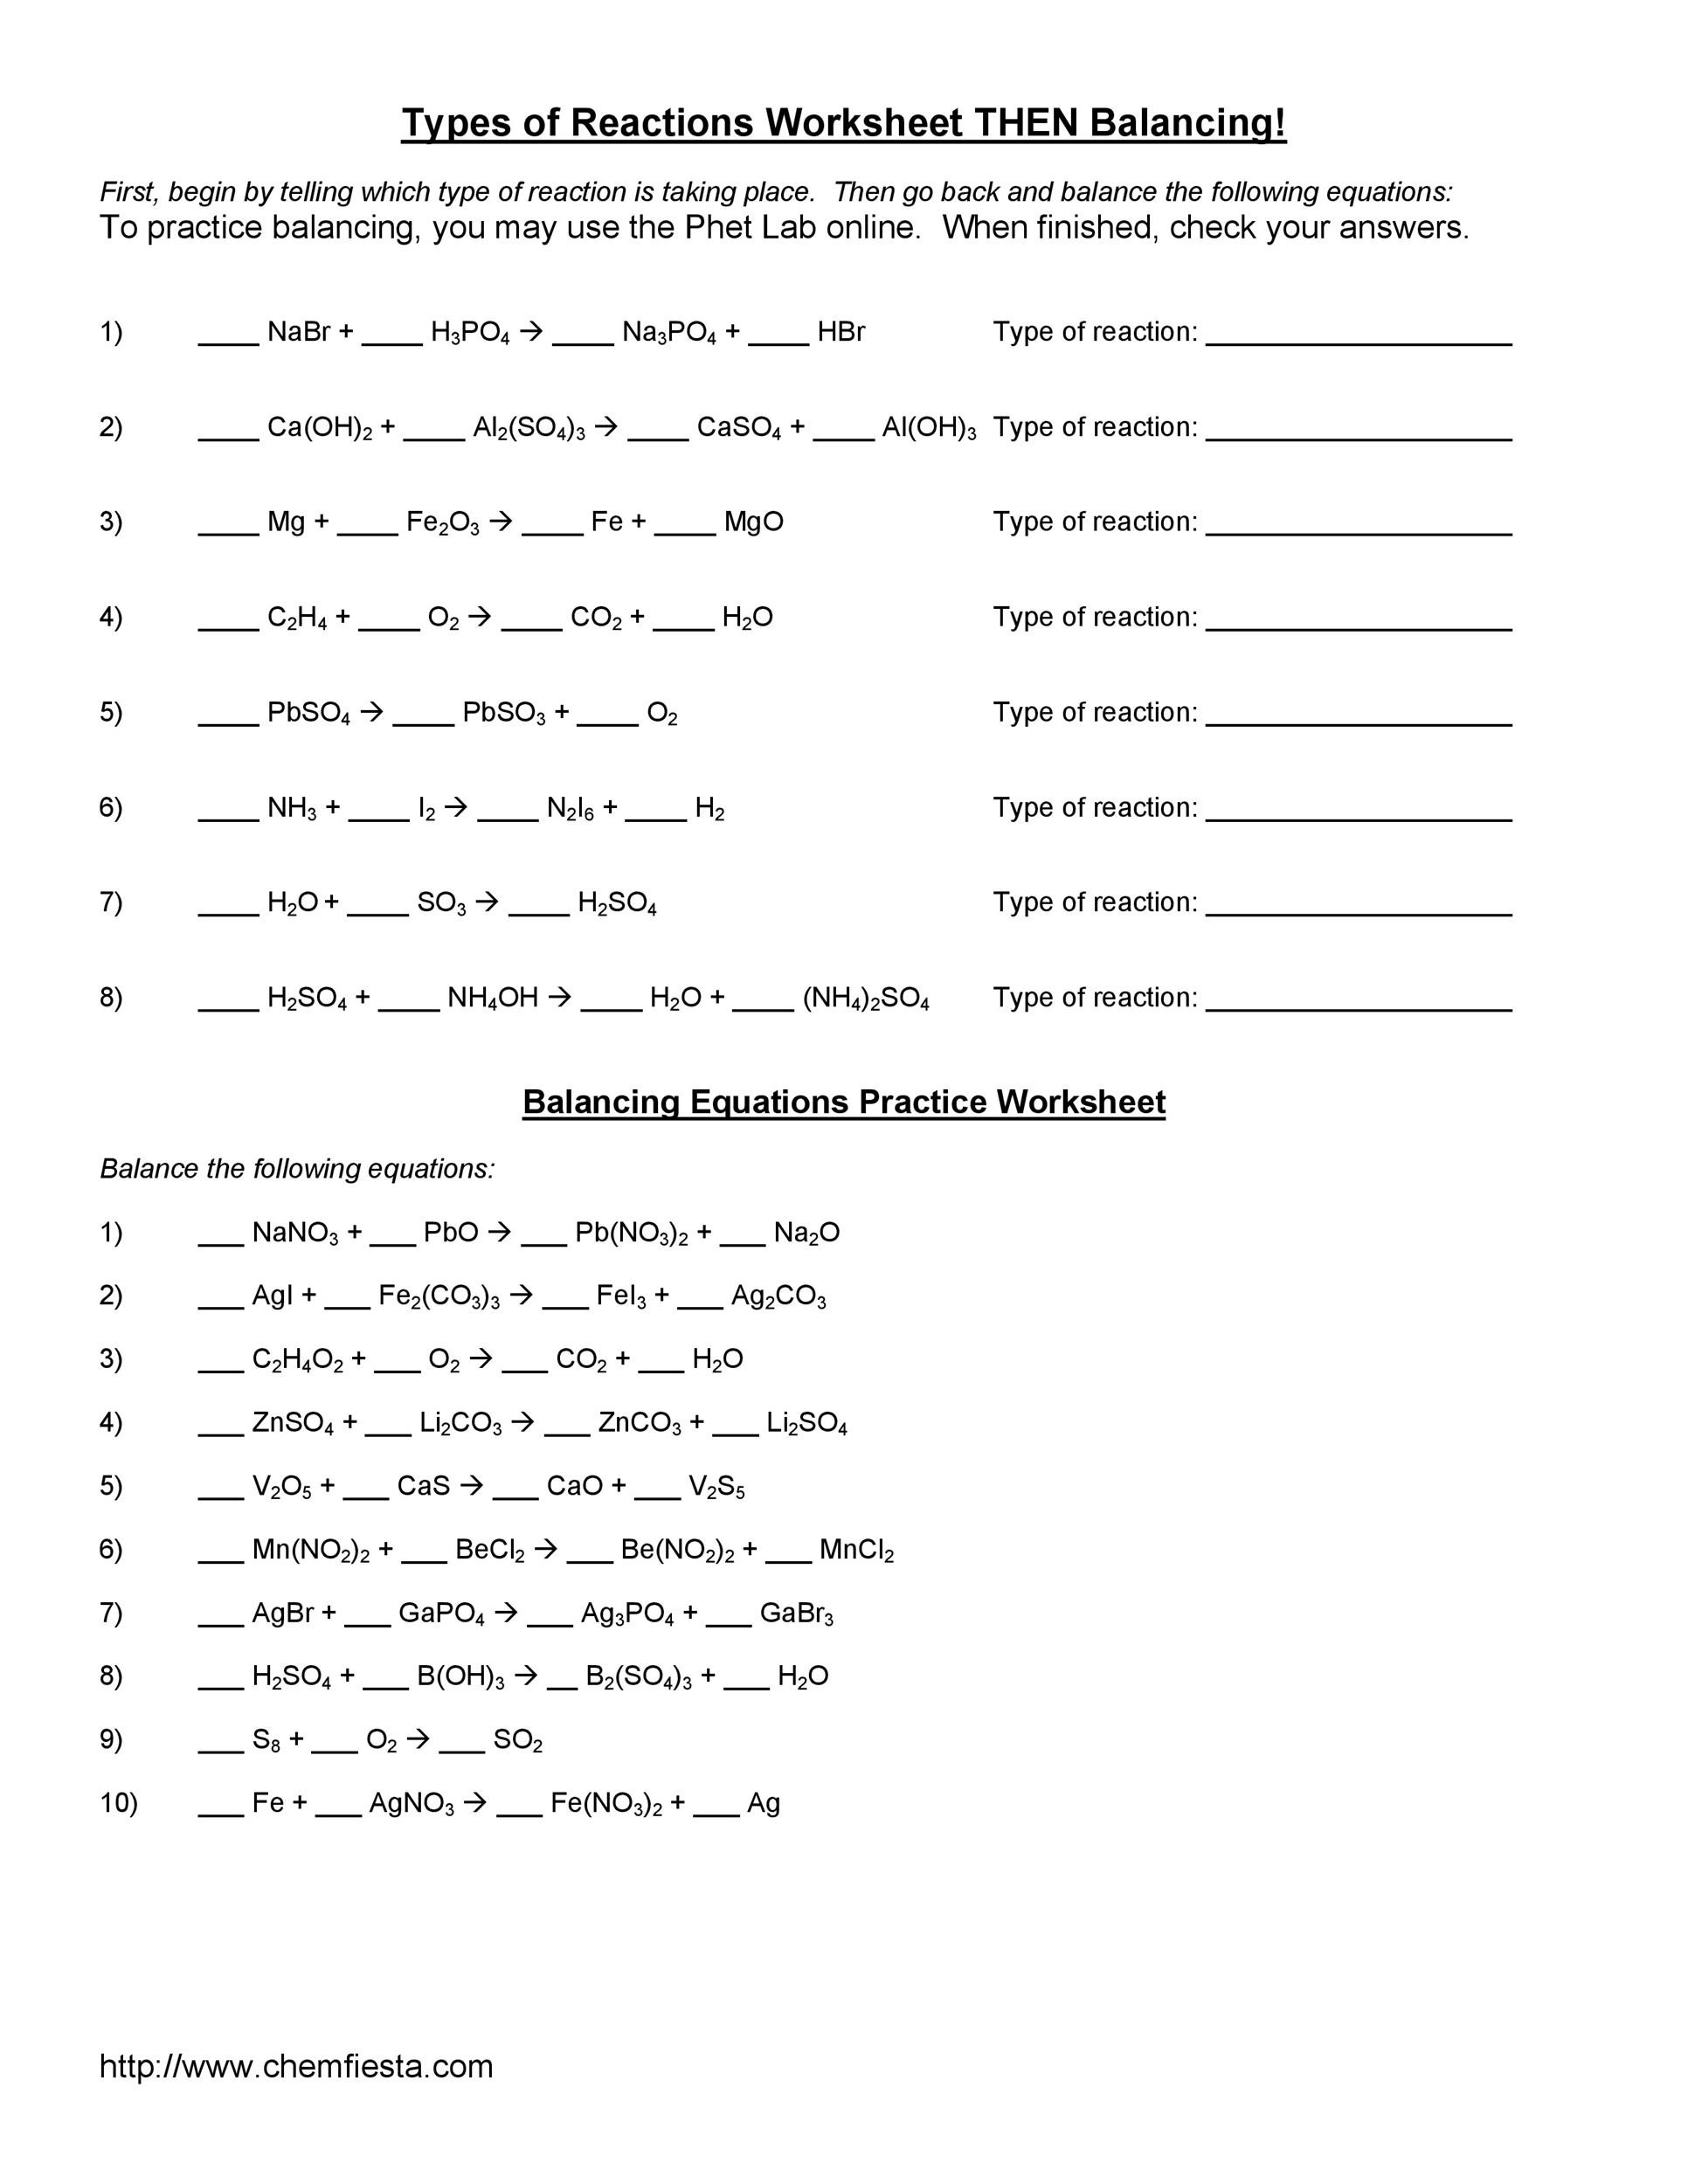 Types Of Reactions Worksheet Answers 30 Balancing and Types Reactions Worksheet Worksheet